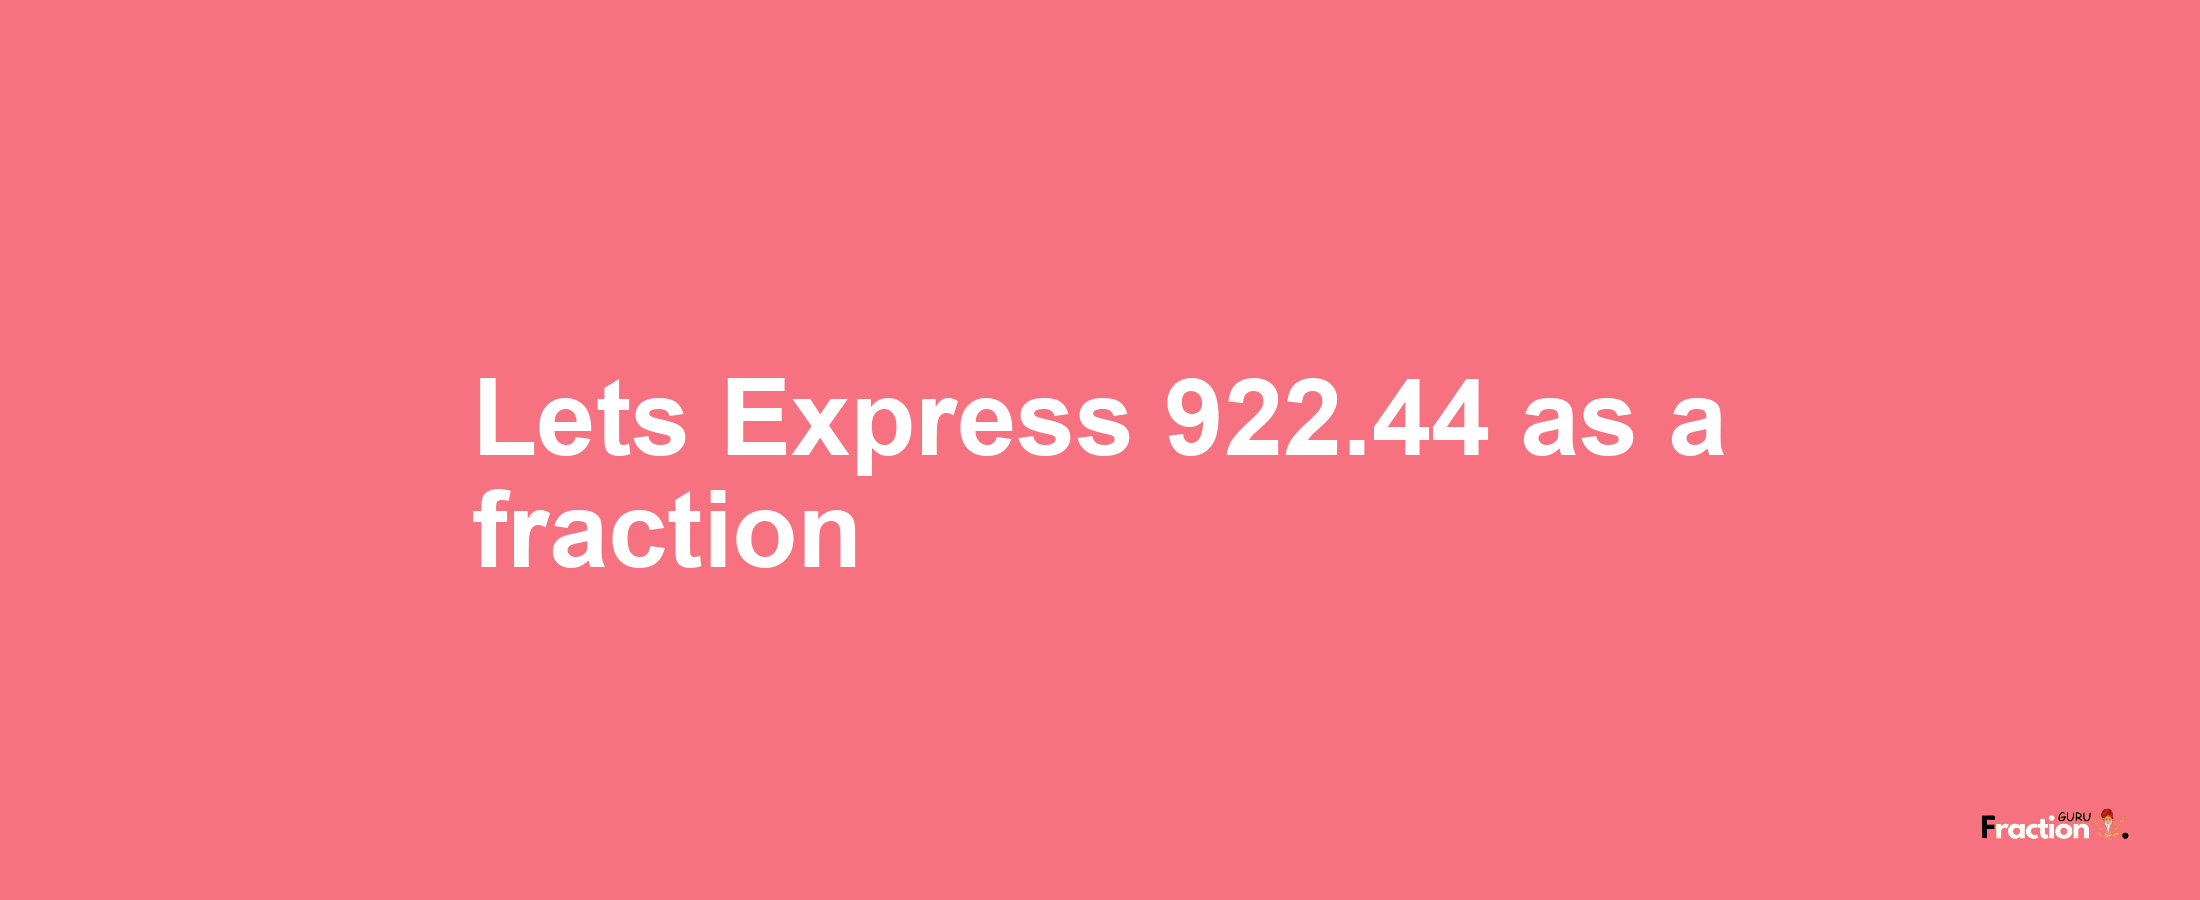 Lets Express 922.44 as afraction